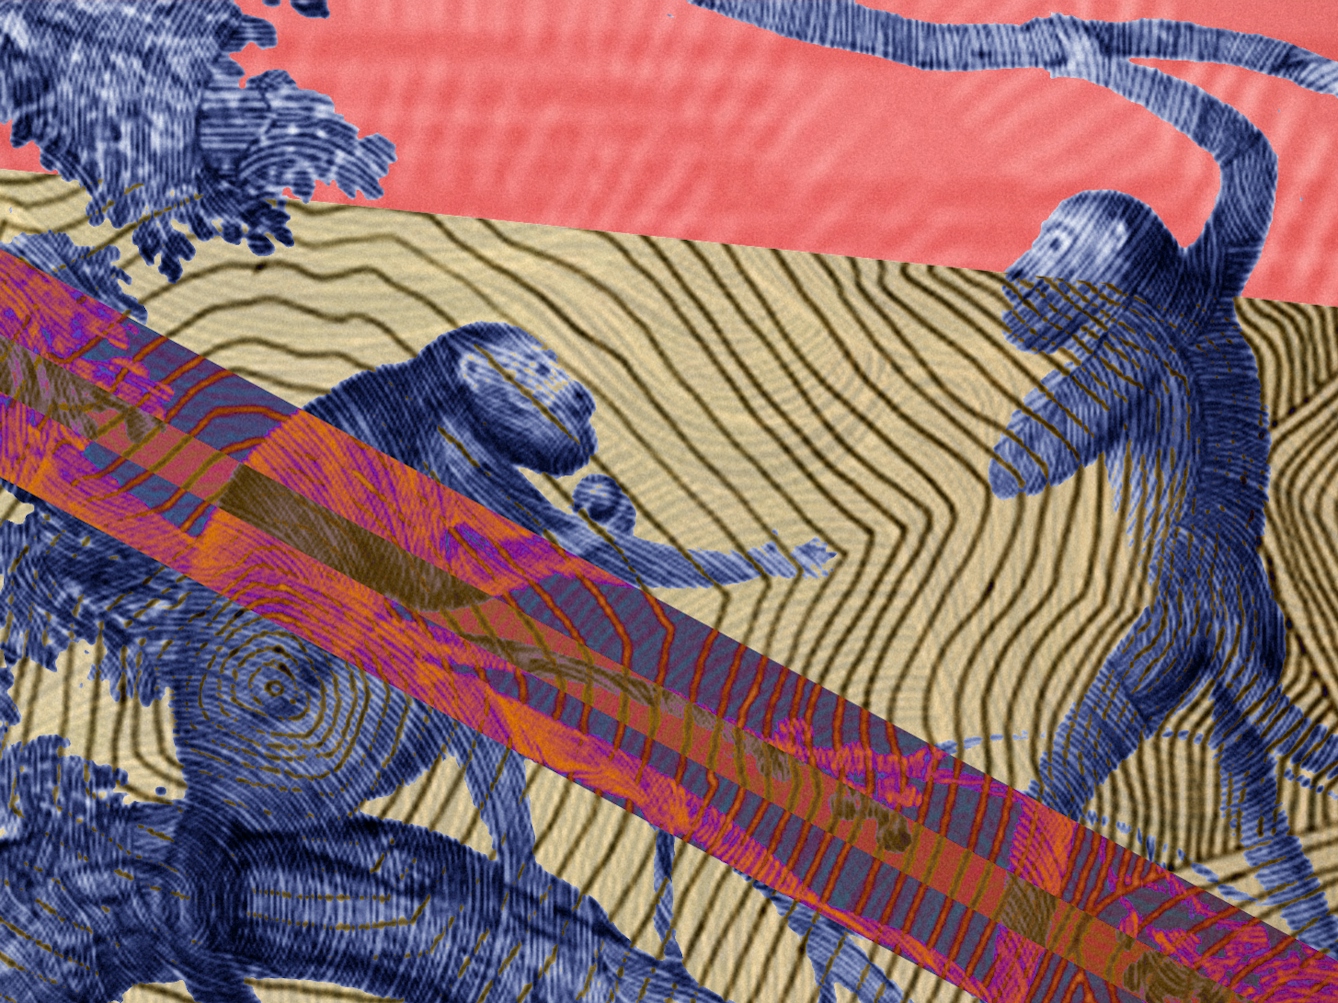 Detail from a larger abstract digital illustration depicting extramission and intromission. A pregnant woman is looking at a group of monkeys sitting on tree branches while the animals are emitting a rays of light towards her unborn child.